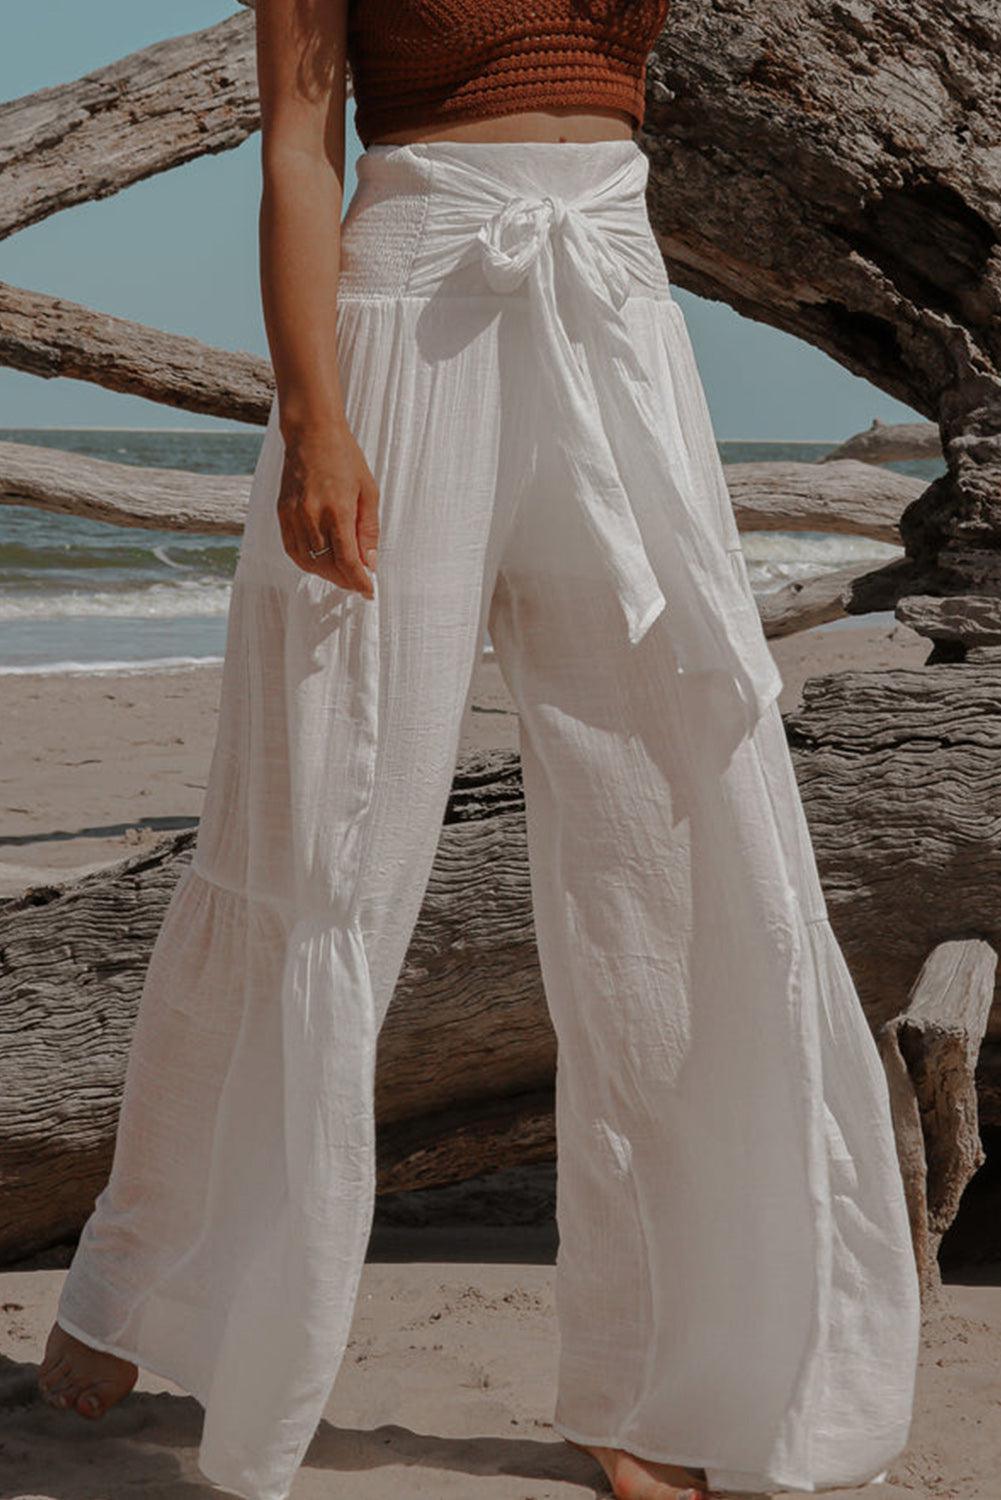 a woman standing on a beach wearing a brown top and white pants